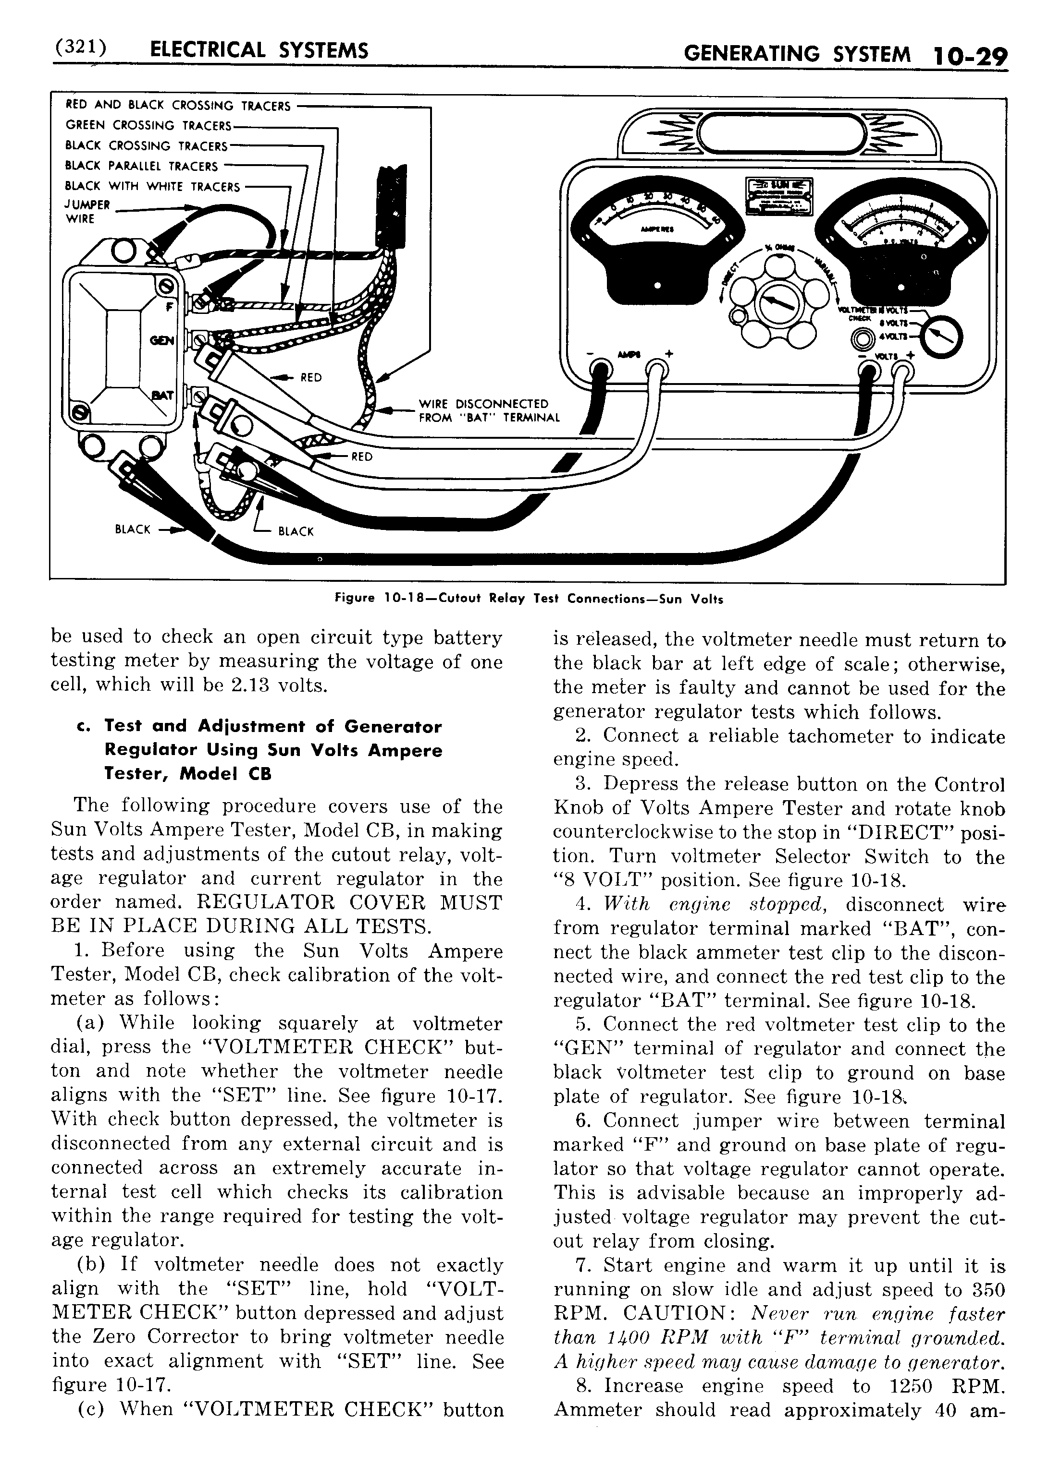 n_11 1951 Buick Shop Manual - Electrical Systems-029-029.jpg